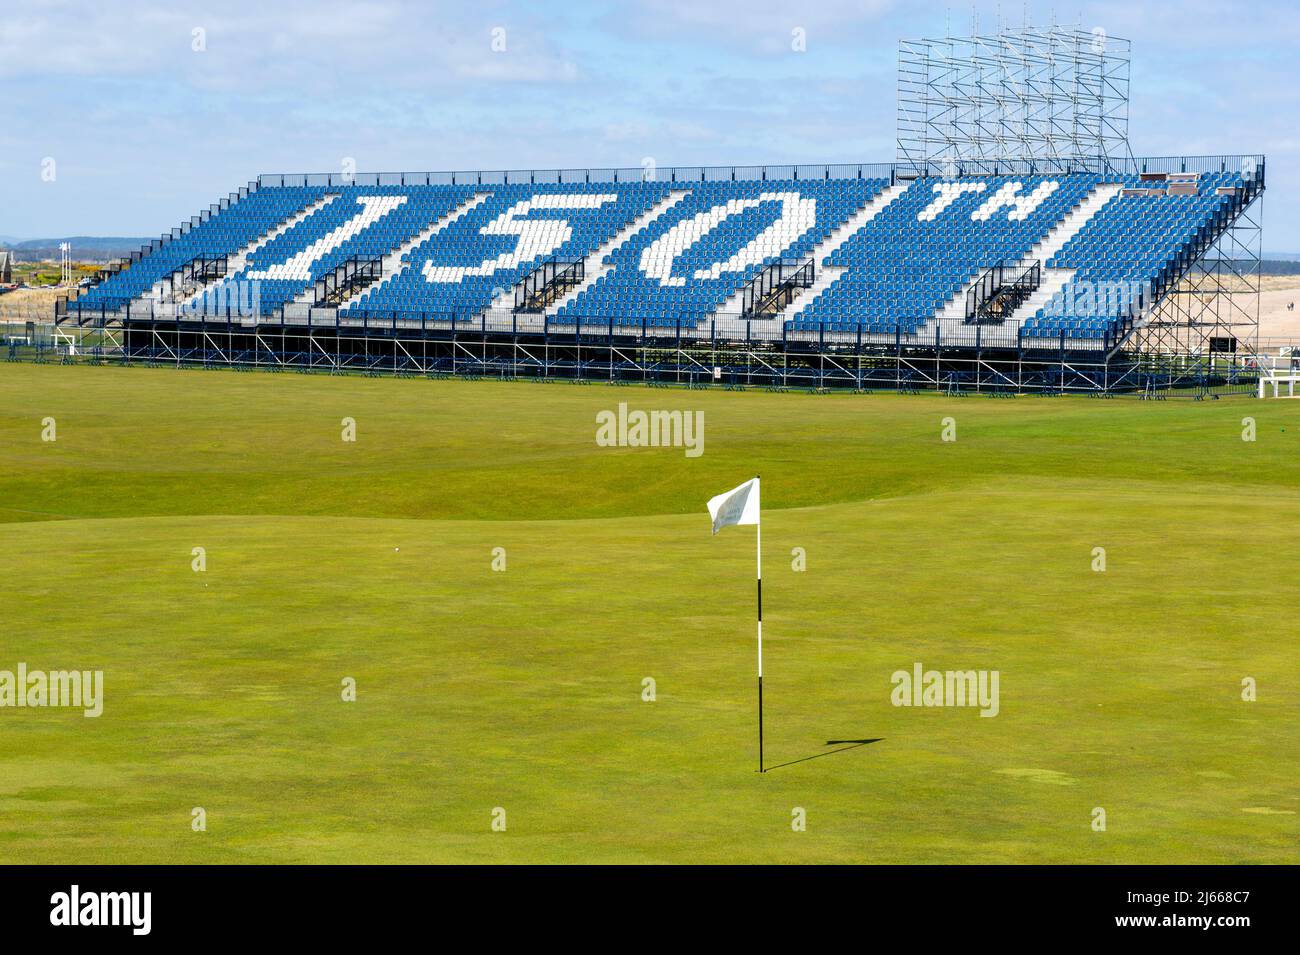 Temporary stands overlooking 18th green of the Old Course, which will host the 150th Open Golf tournament at St Andrews in July 2022. Stock Photo